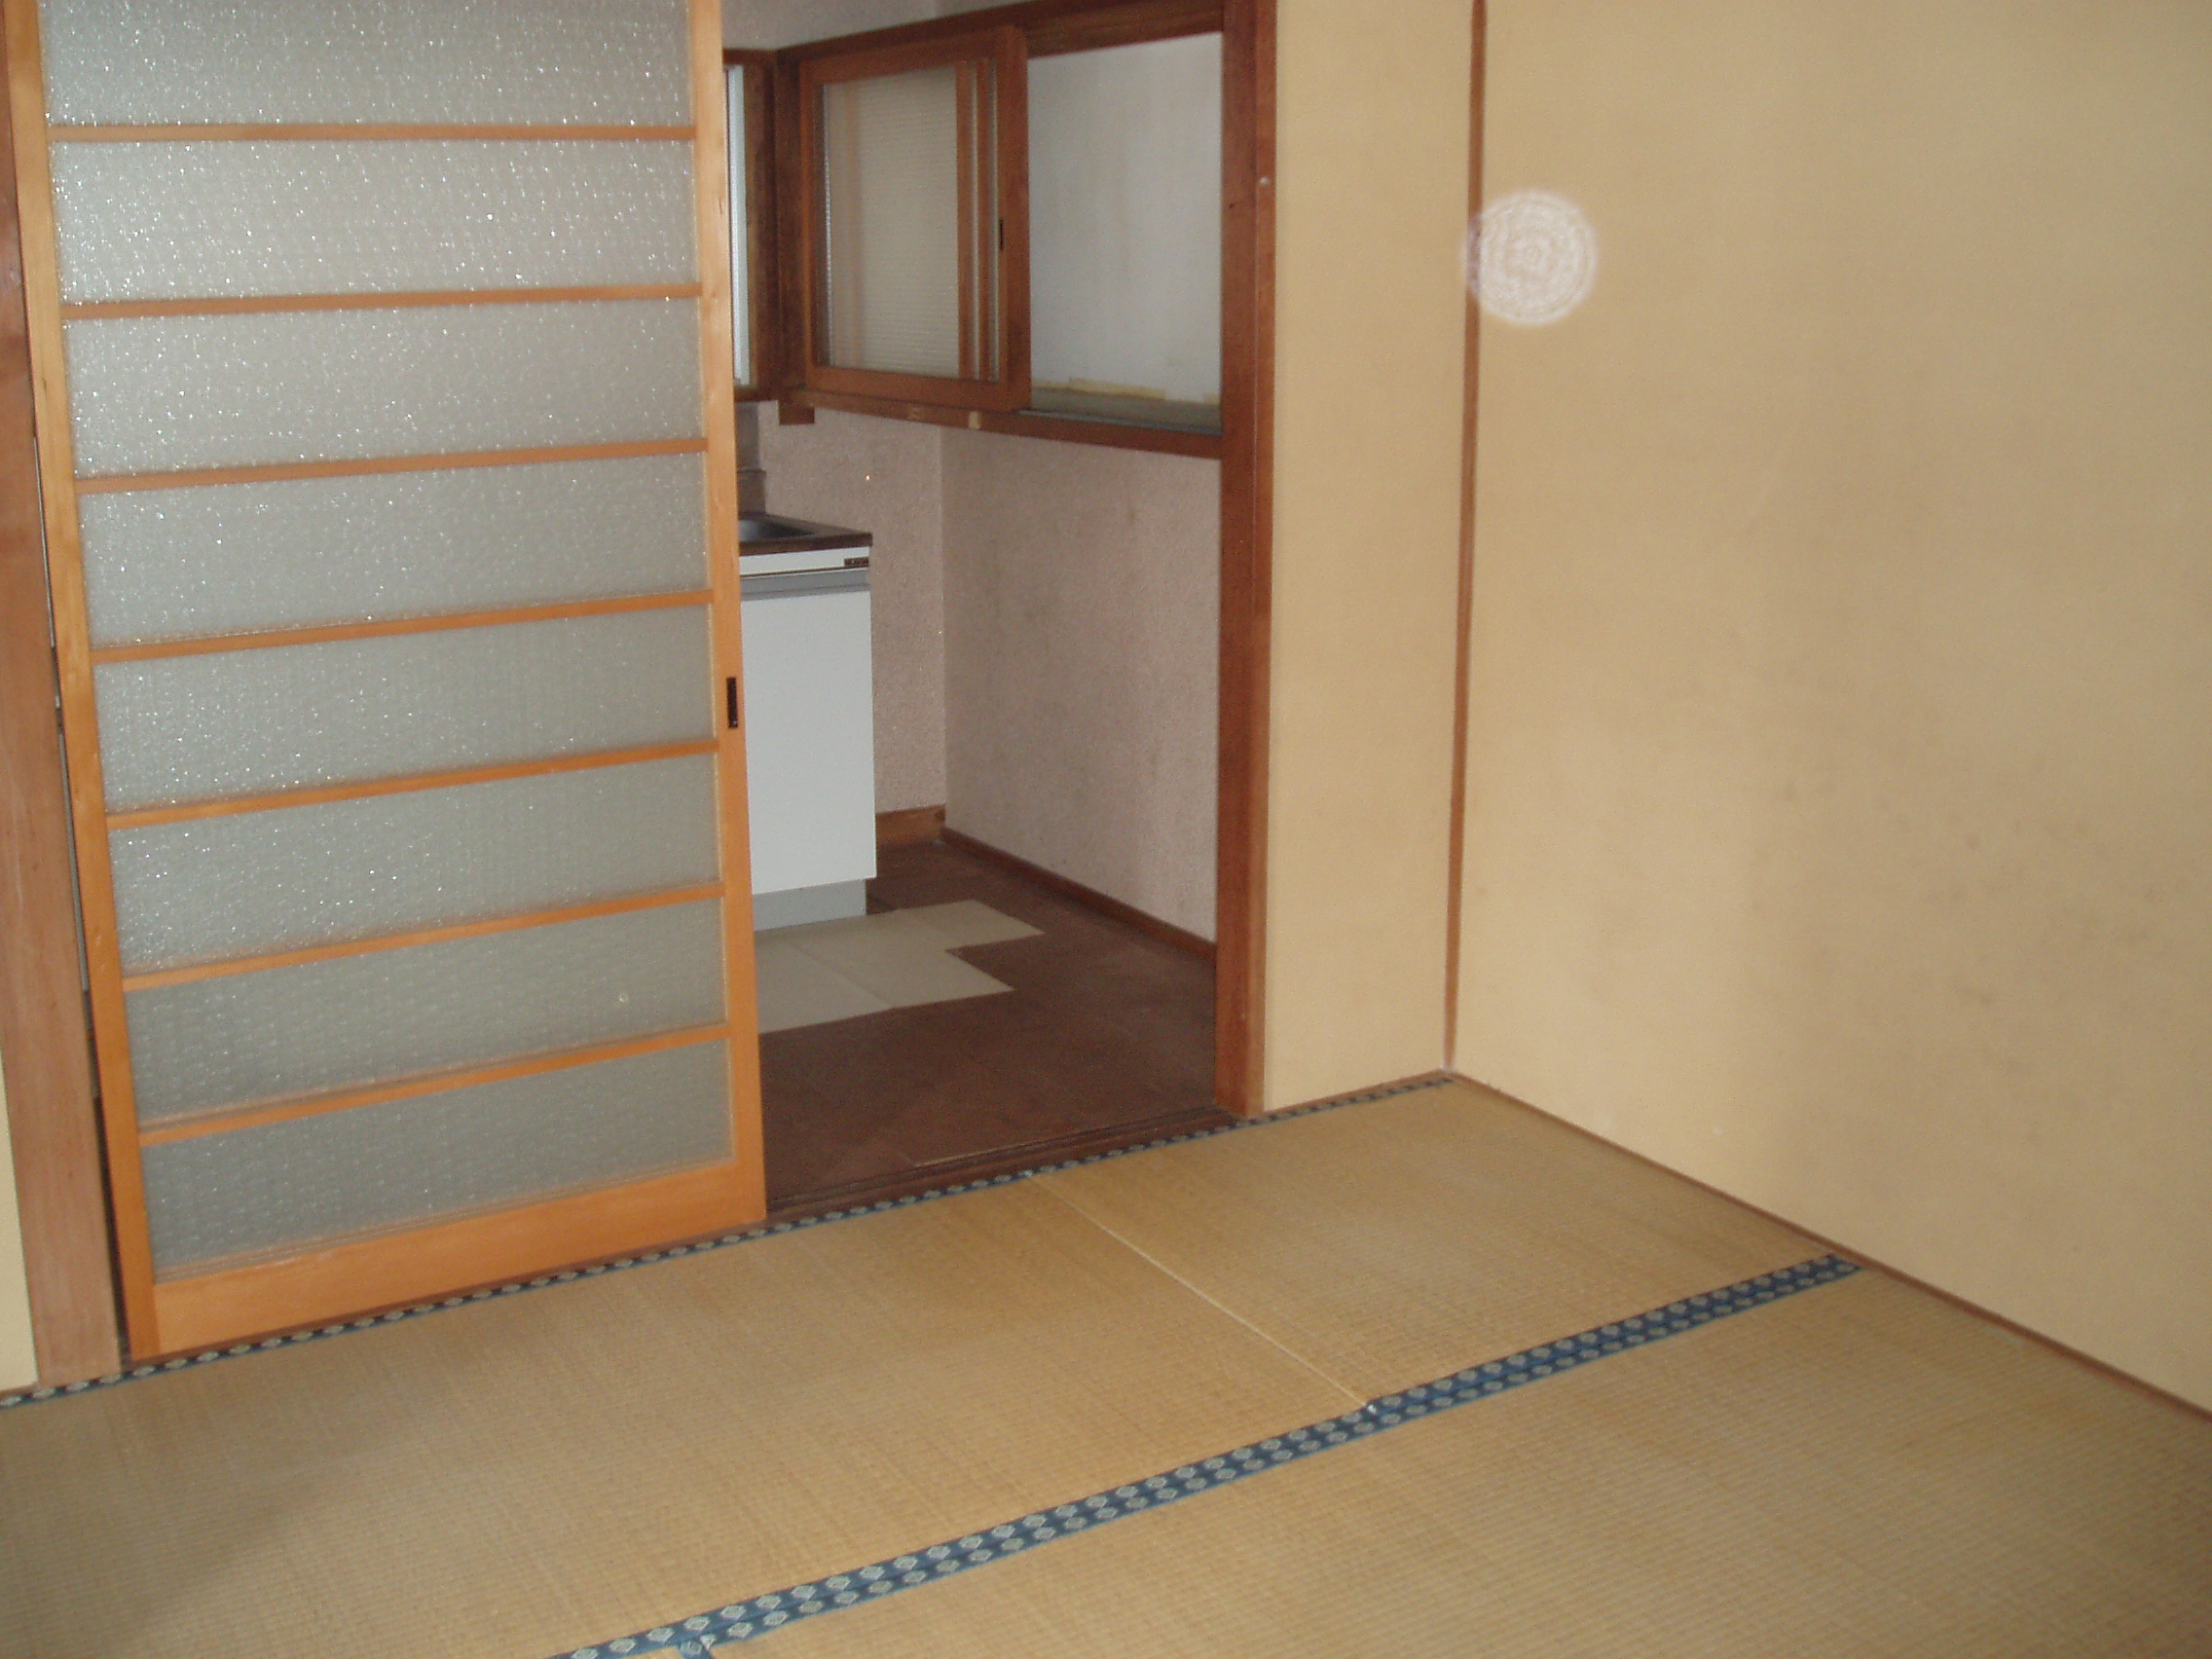 Living and room. 4 tatami mats and a half